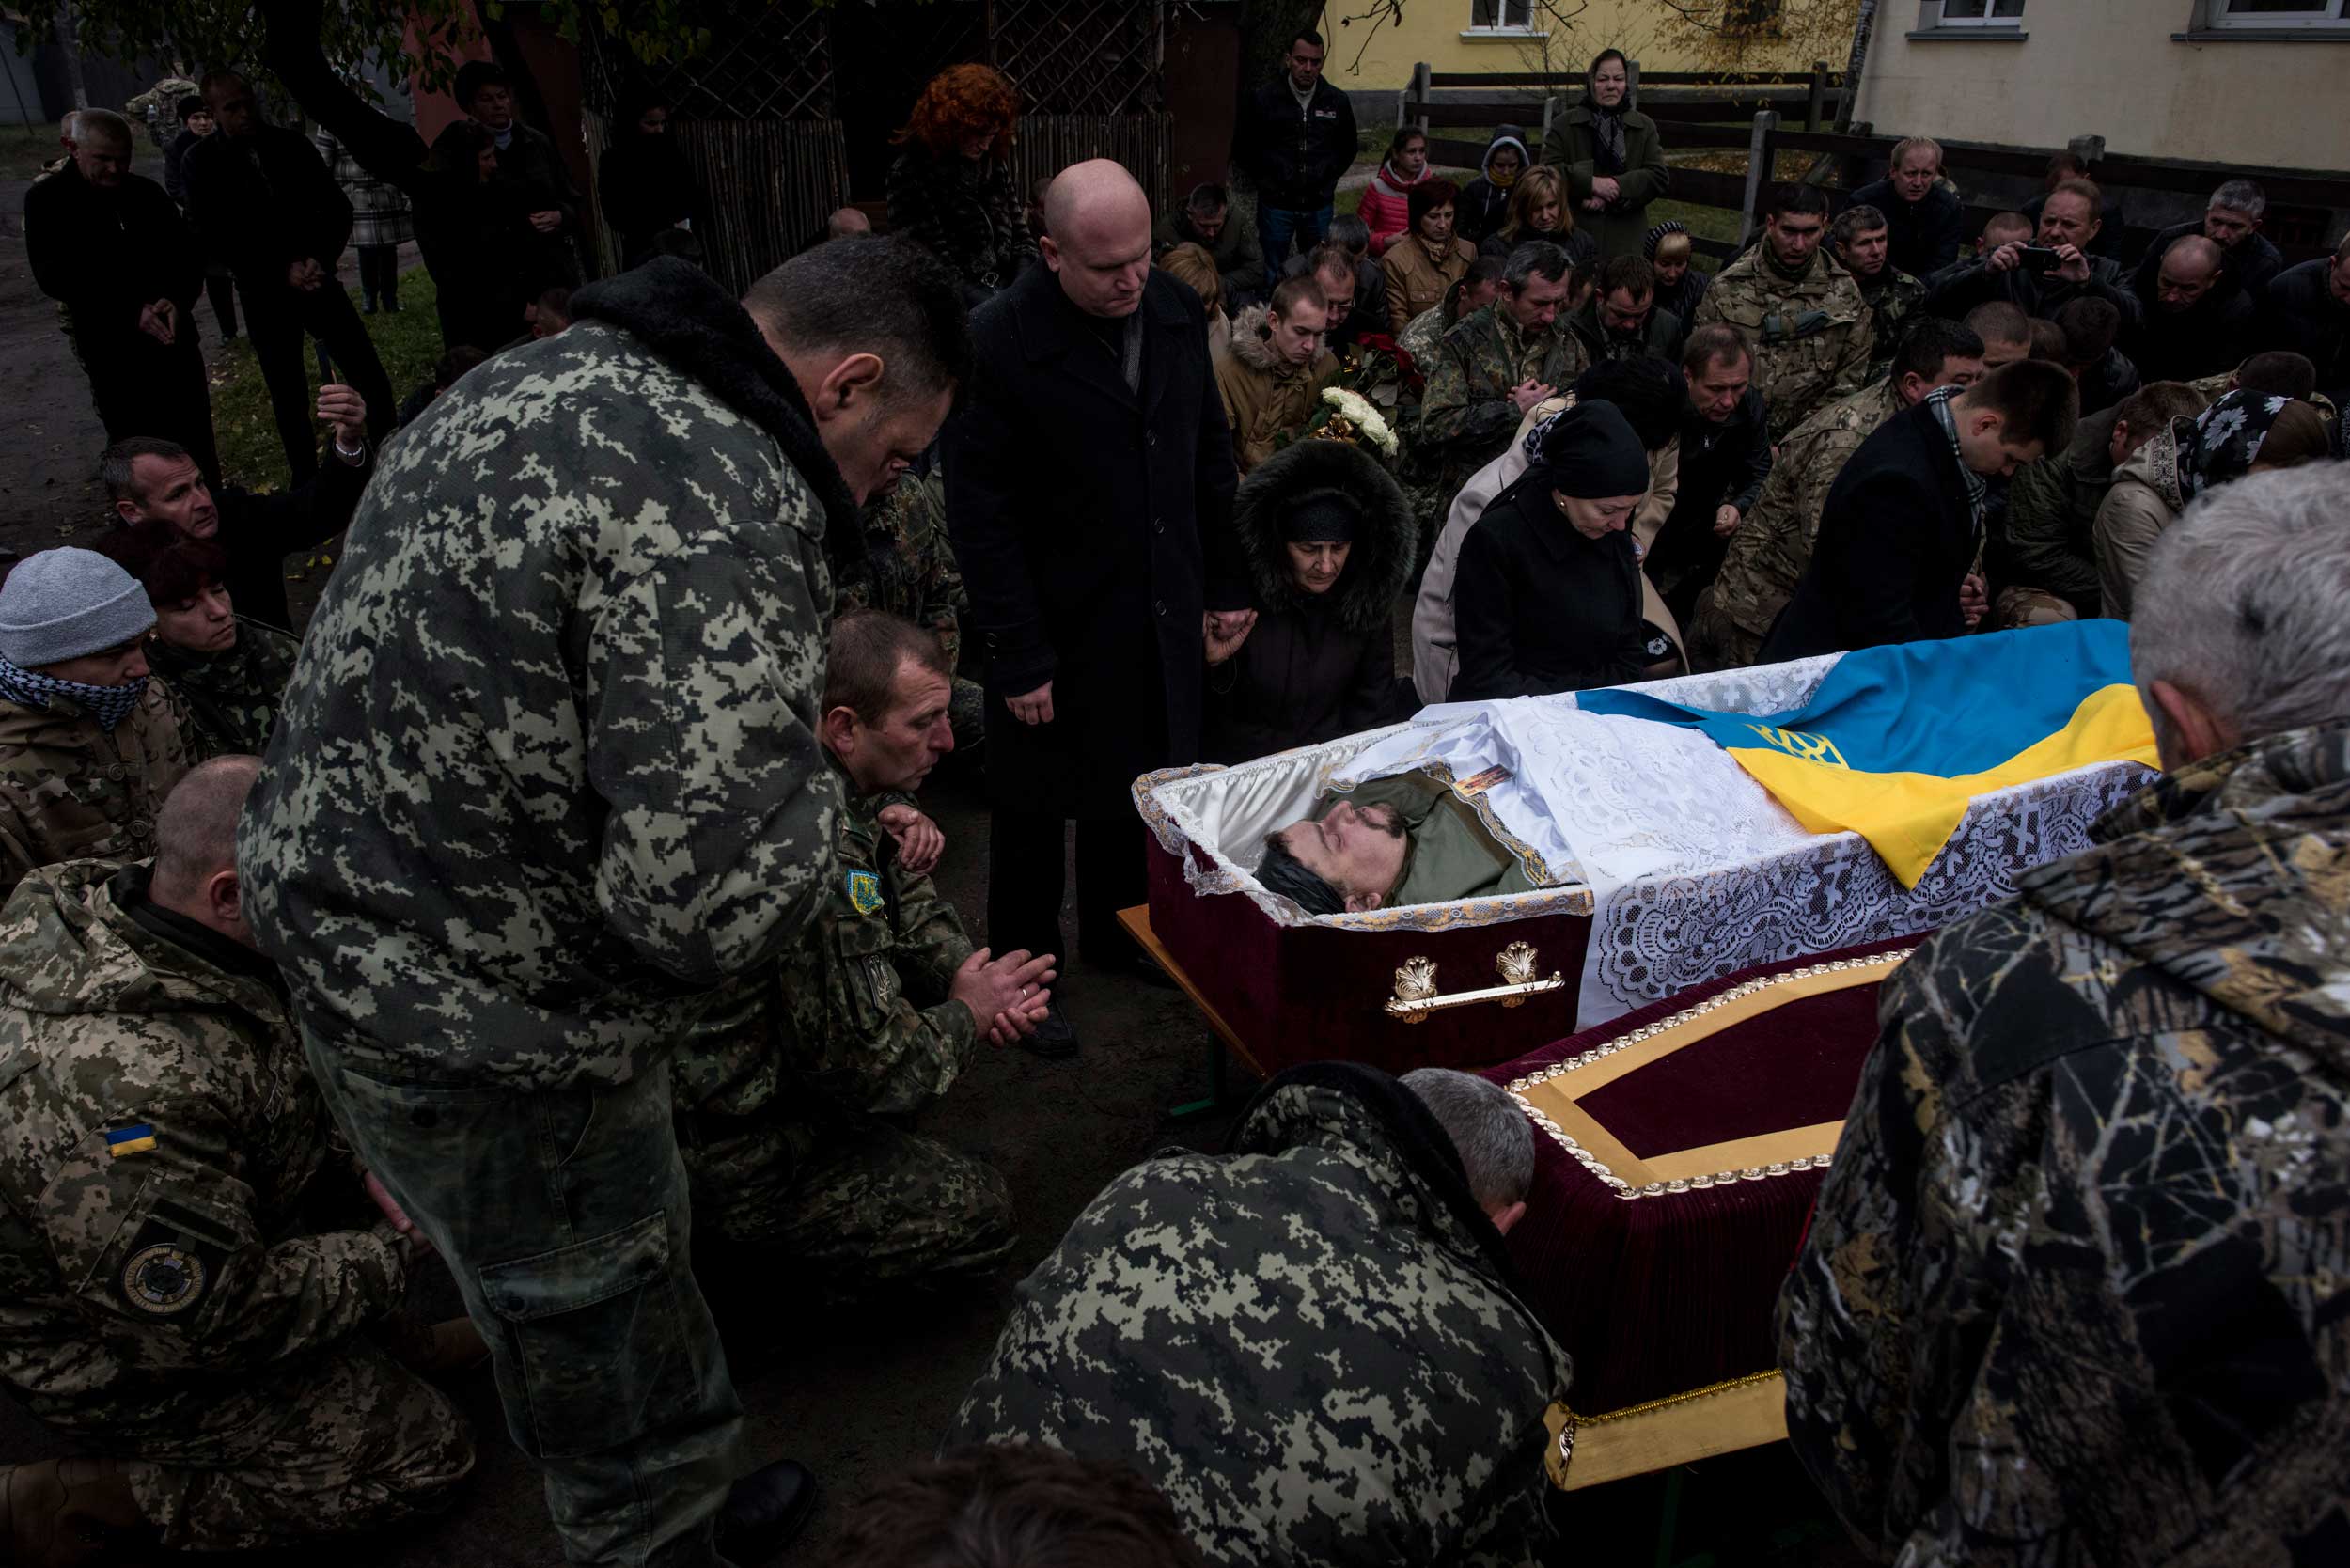 Relatives and comrades say their last goodbye to Ukrainian serviceman Vitaliy Kravchenko, whose body is in the coffin. He was killed by a mine explosion near Avdiivka, during a commemoration ceremony in Rava-Russkya, western Ukraine, Nov. 5, 2016.